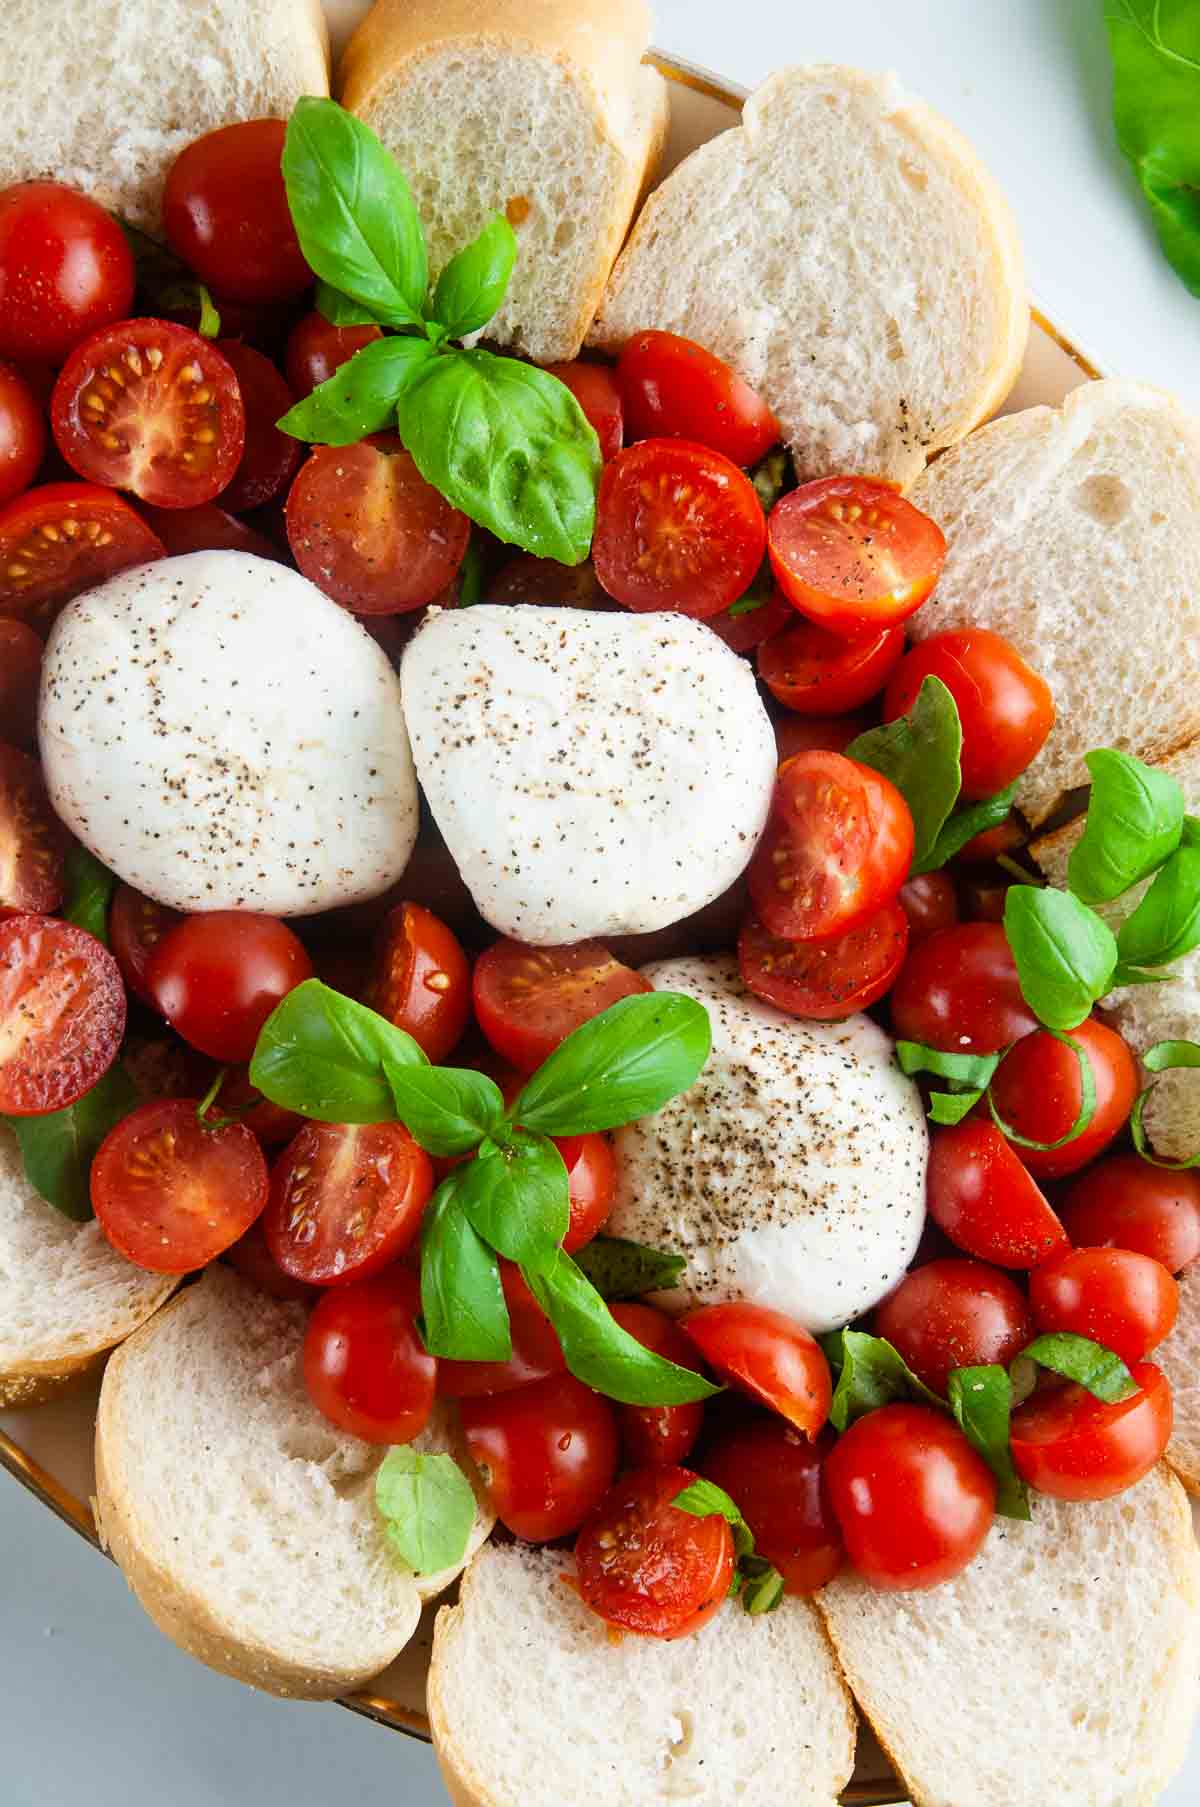 Burrata caprese salad takes the classic flavors of the tomato, mozzarella, and basil combination and turns it up a notch with decadent burrata cheese. This easy variation of caprese with burrata makes for an effortlessly elegant dinner or appetizer anytime.